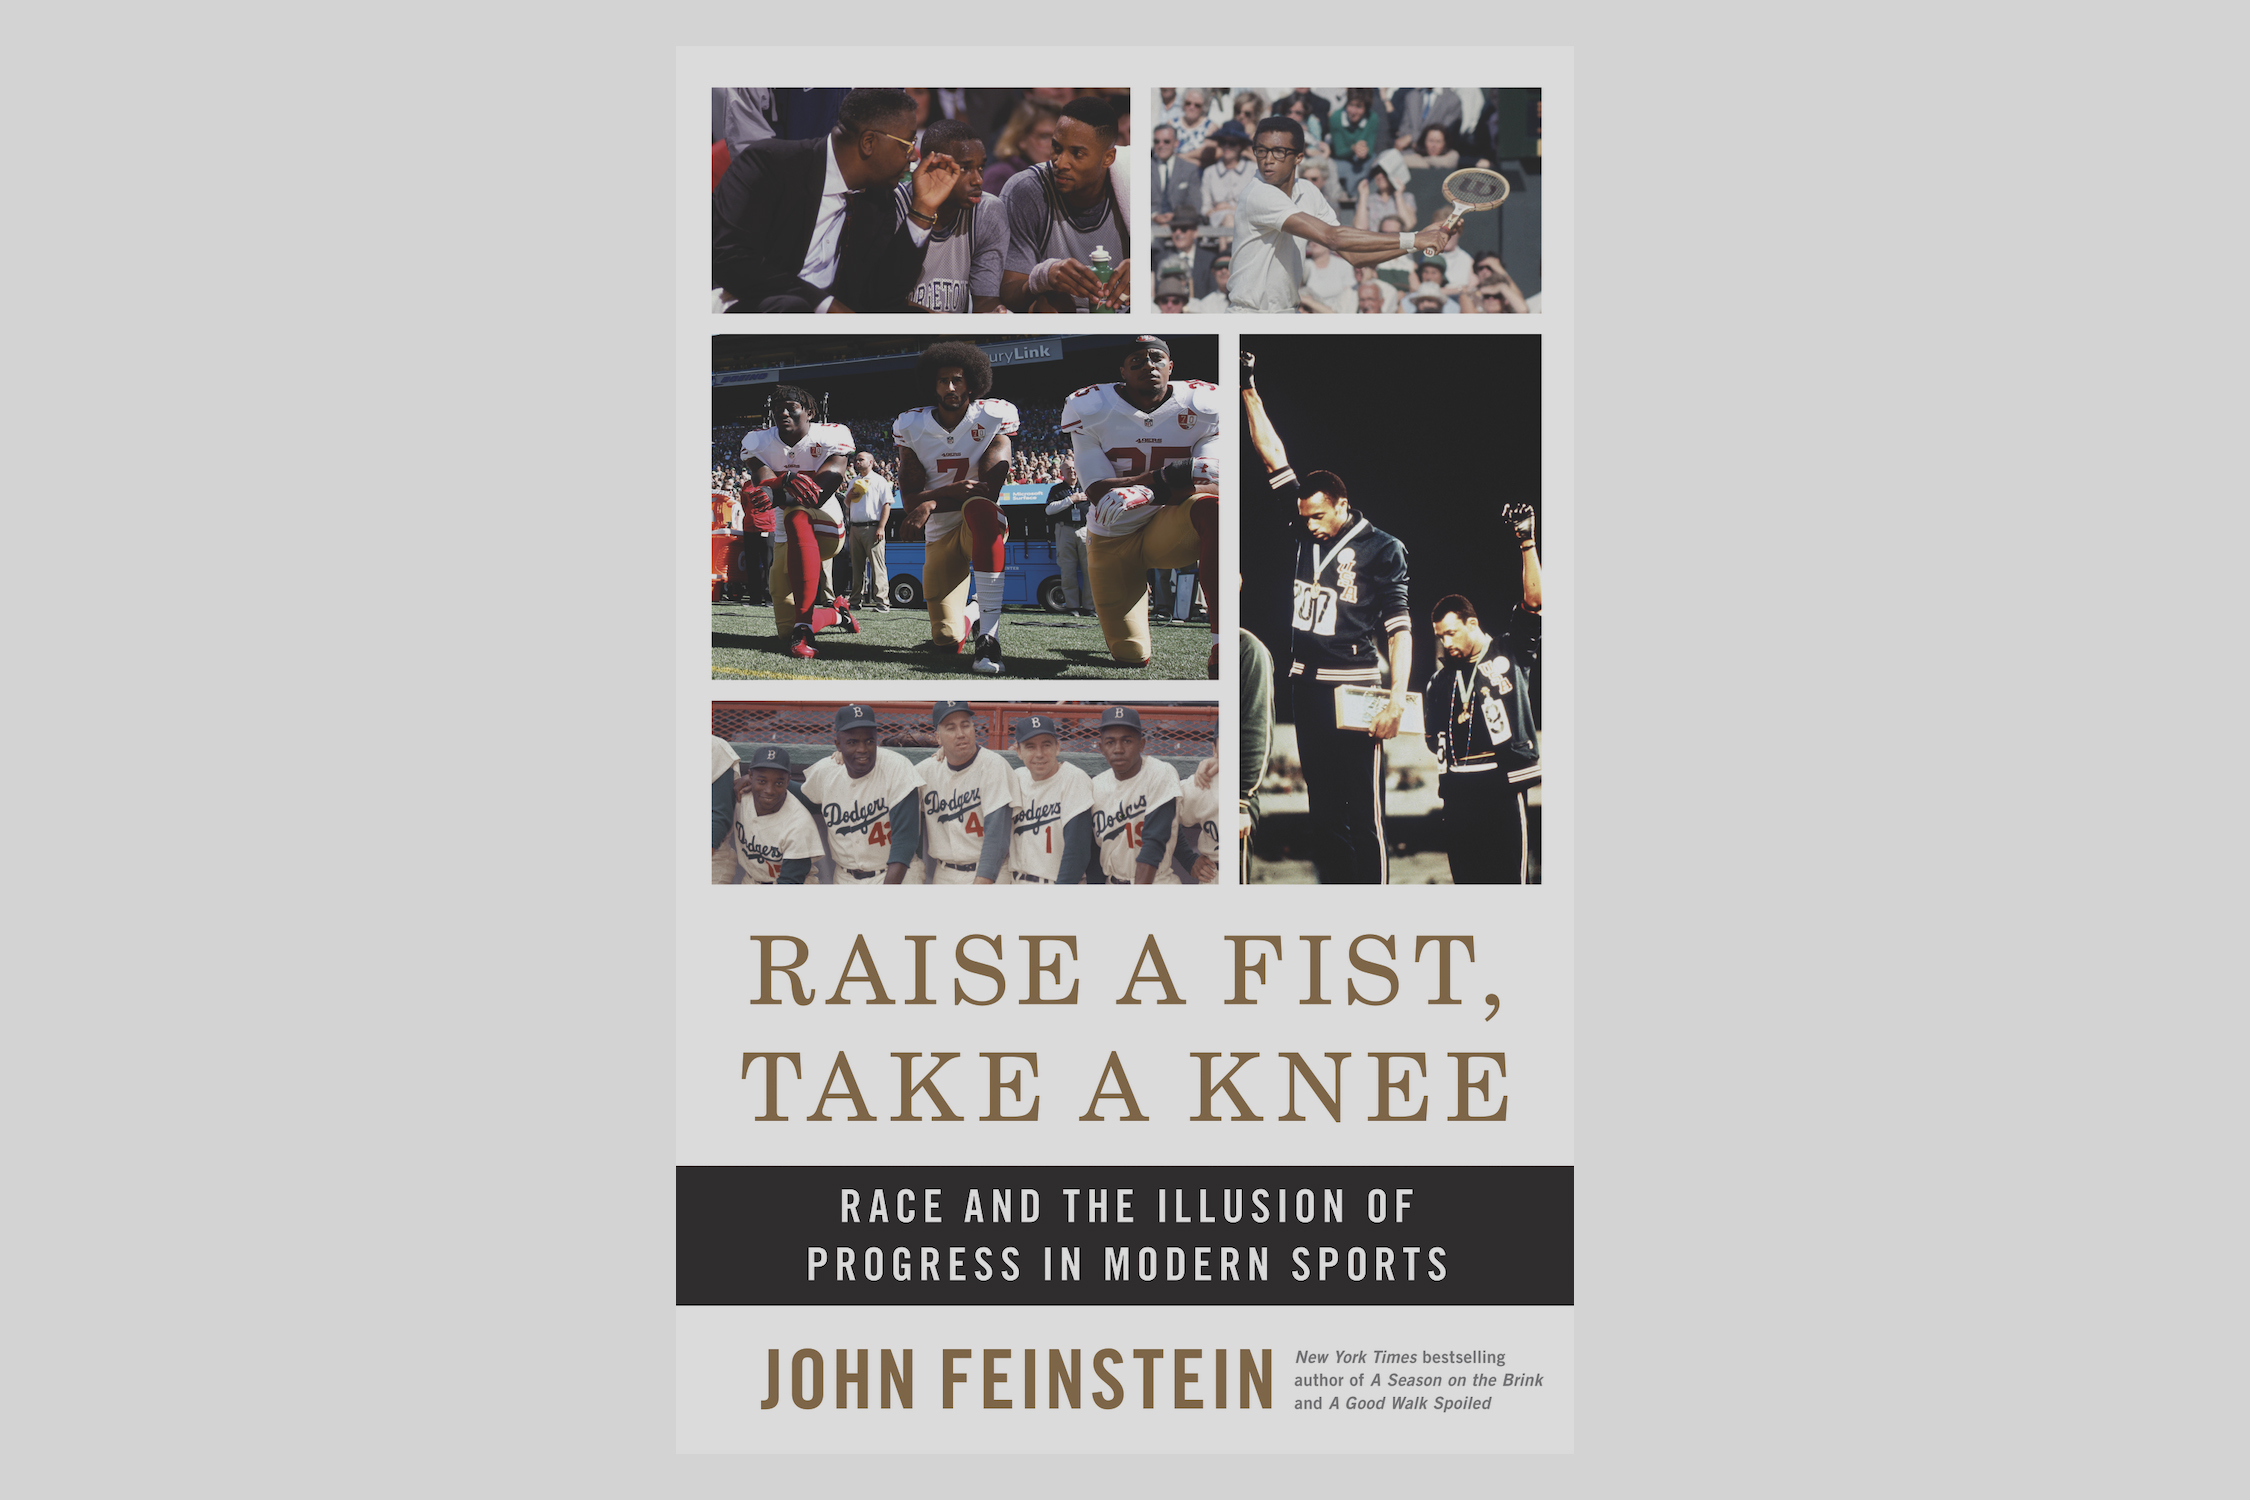 The cover of John Feinstein's "Raise a Fist, Take a Knee: Race and the Illusion of Progress in Modern Sports."